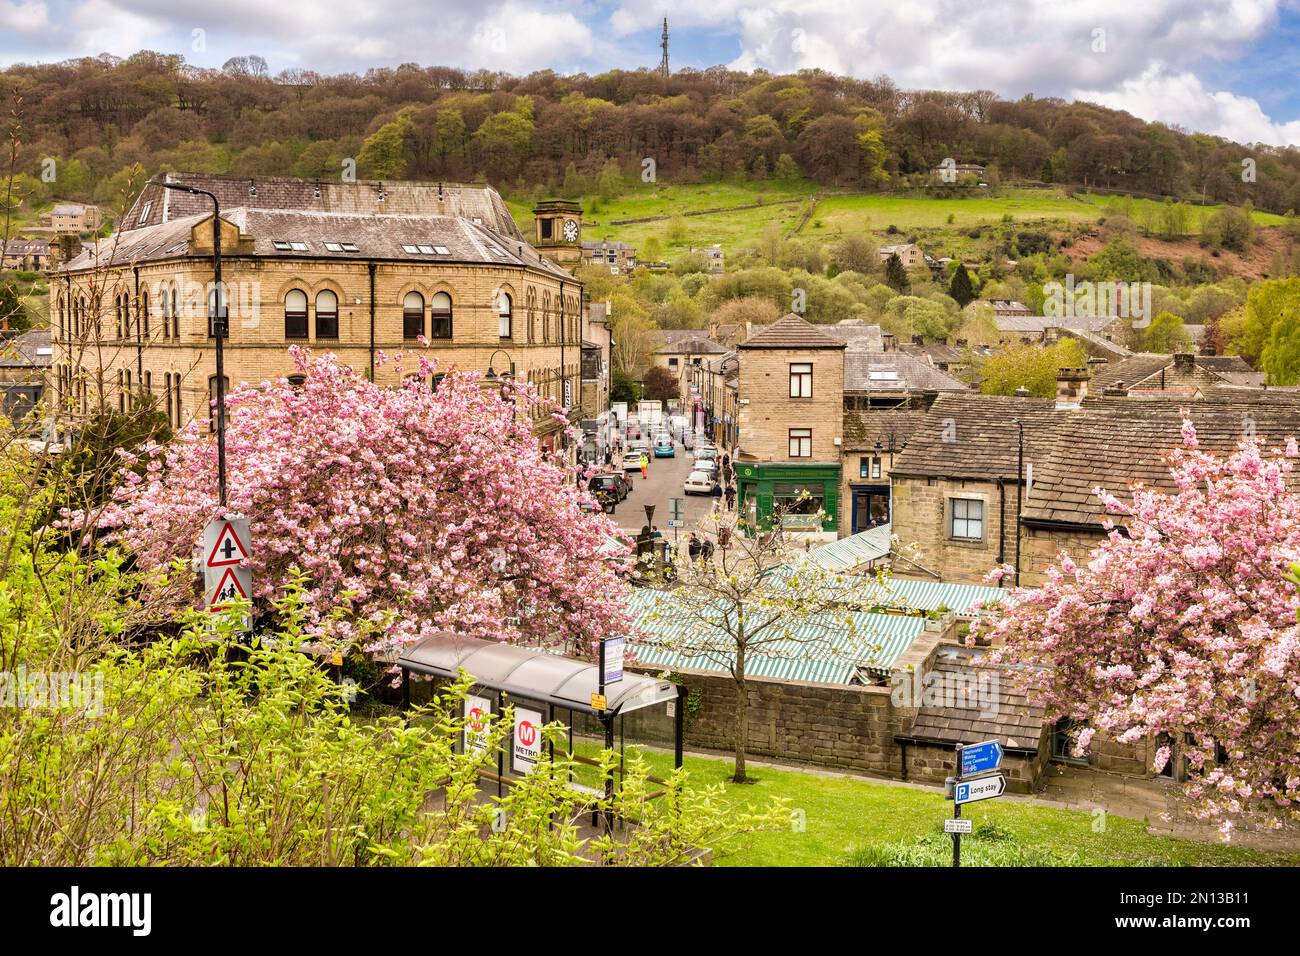 27 April 2022: Hebden Bridge, UK - A view over the beautiful Yorkshire town of Hebden Bridge, with cherry trees and busy Crown Street. Stock Photo